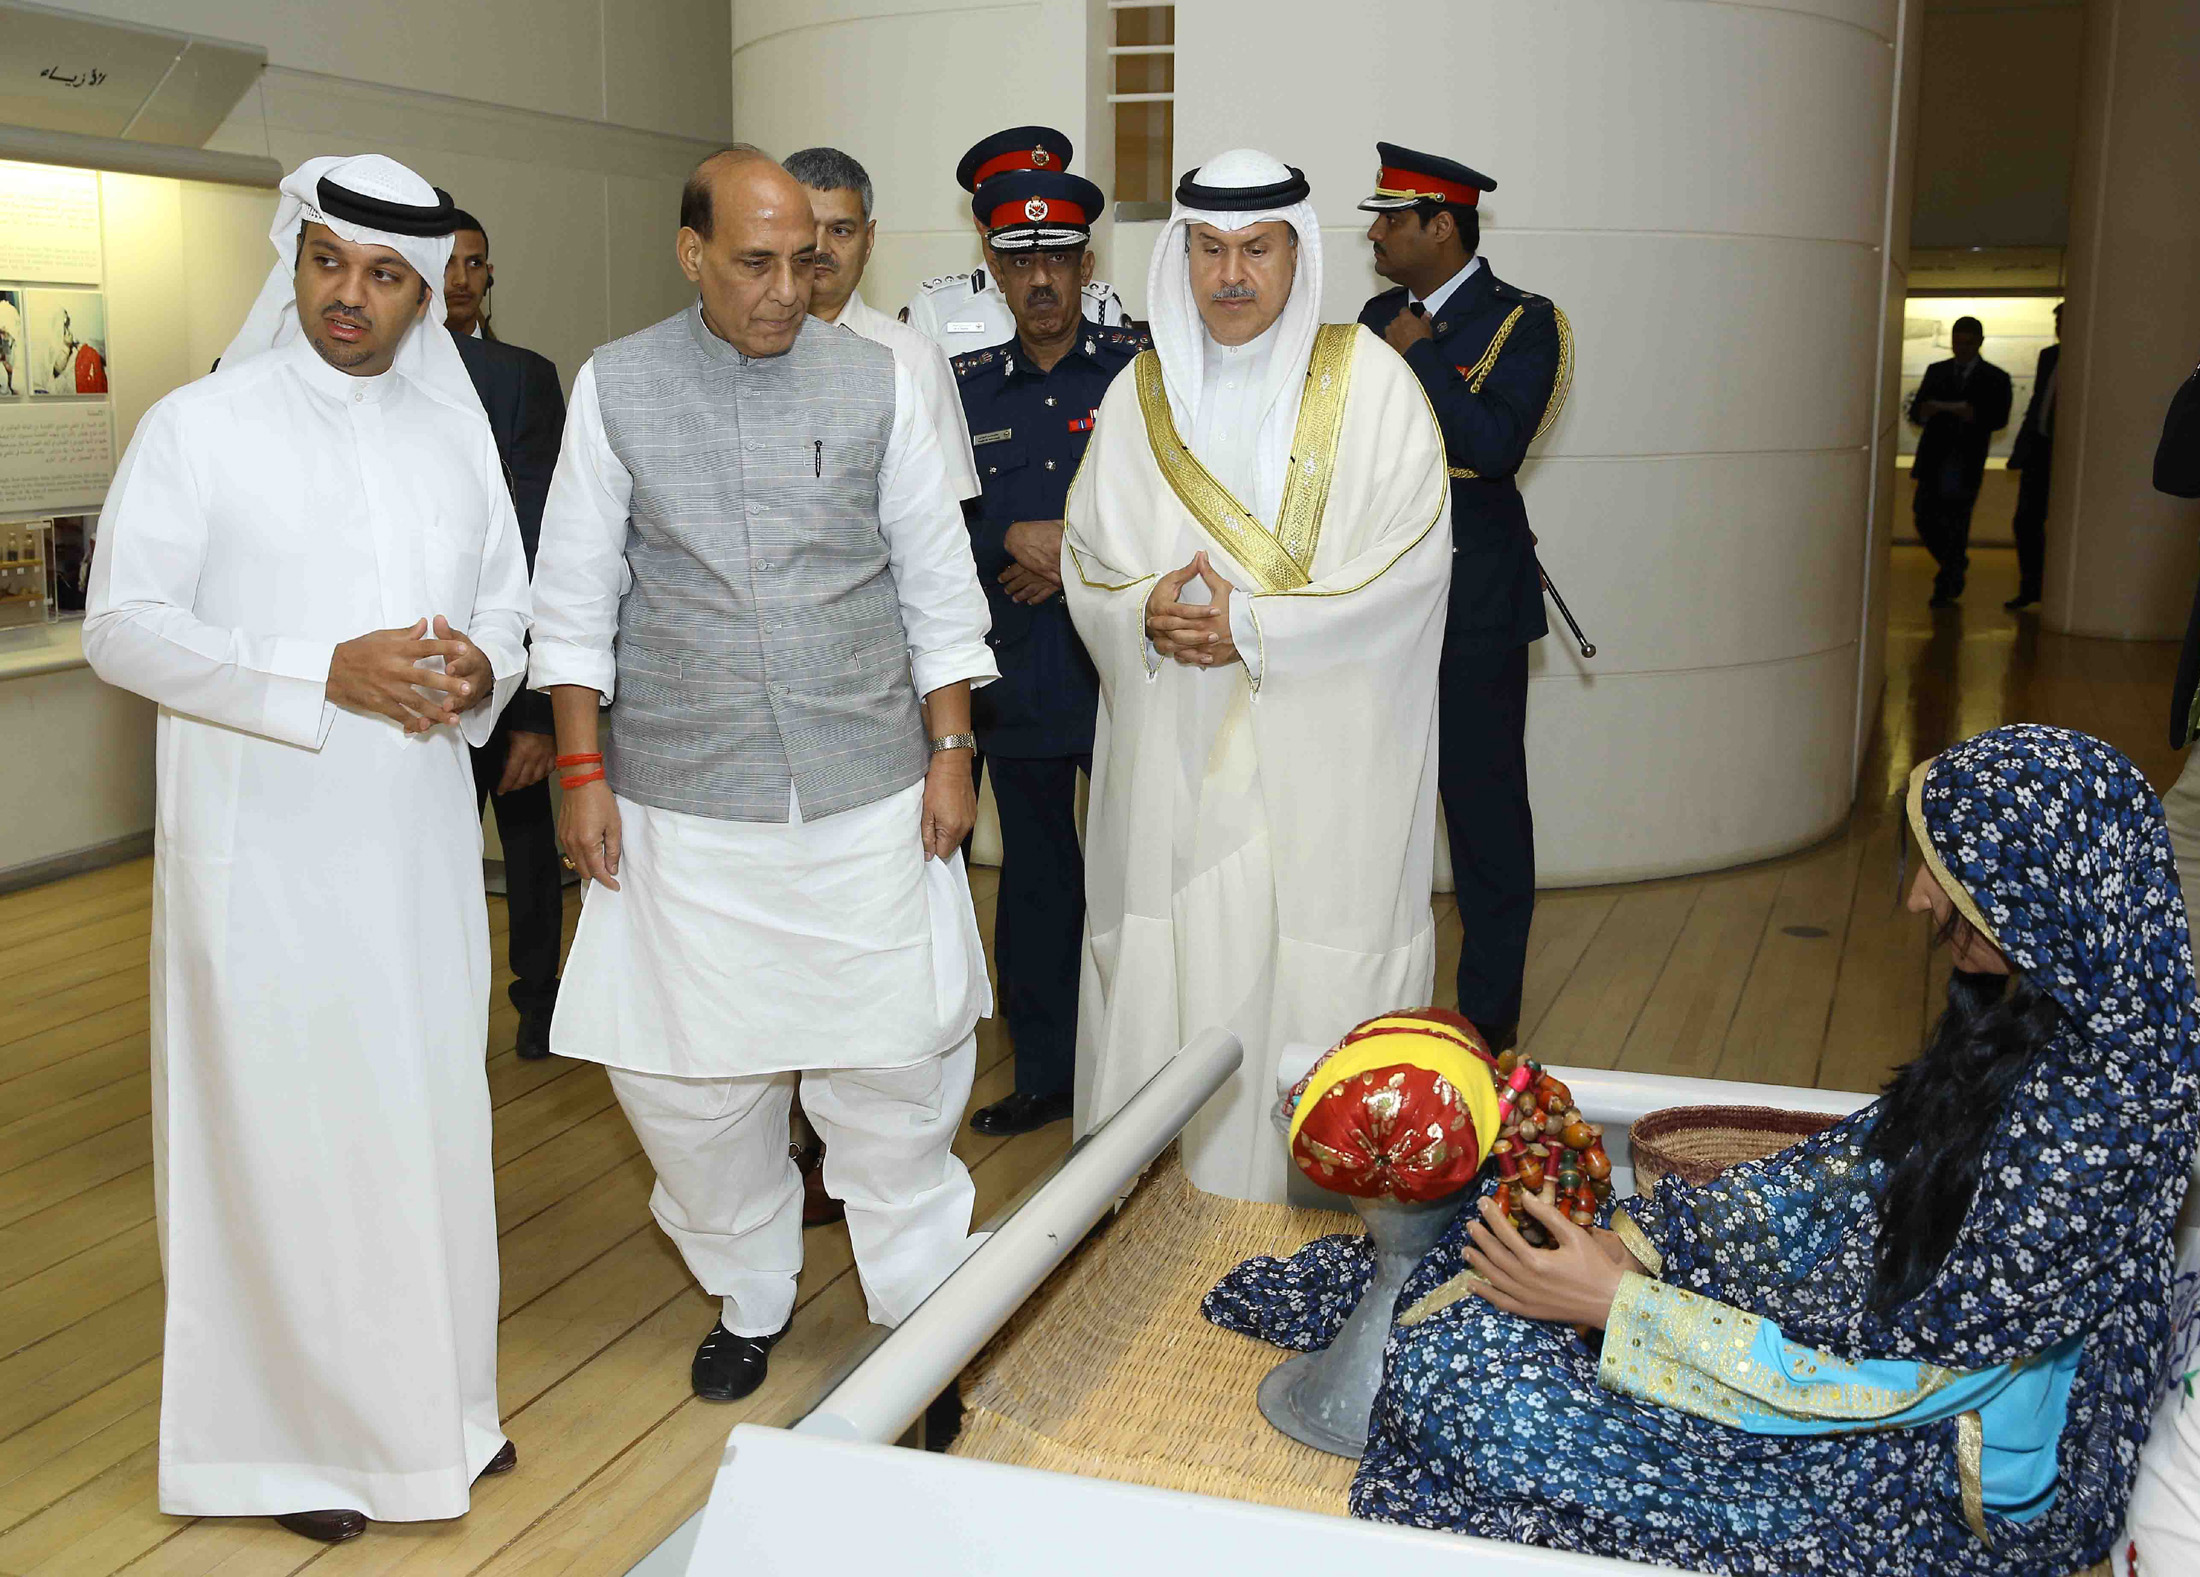 The Union Home Minister, Shri Rajnath Singh visiting the Bahrain National Museum, in Manama on October 25, 2016.